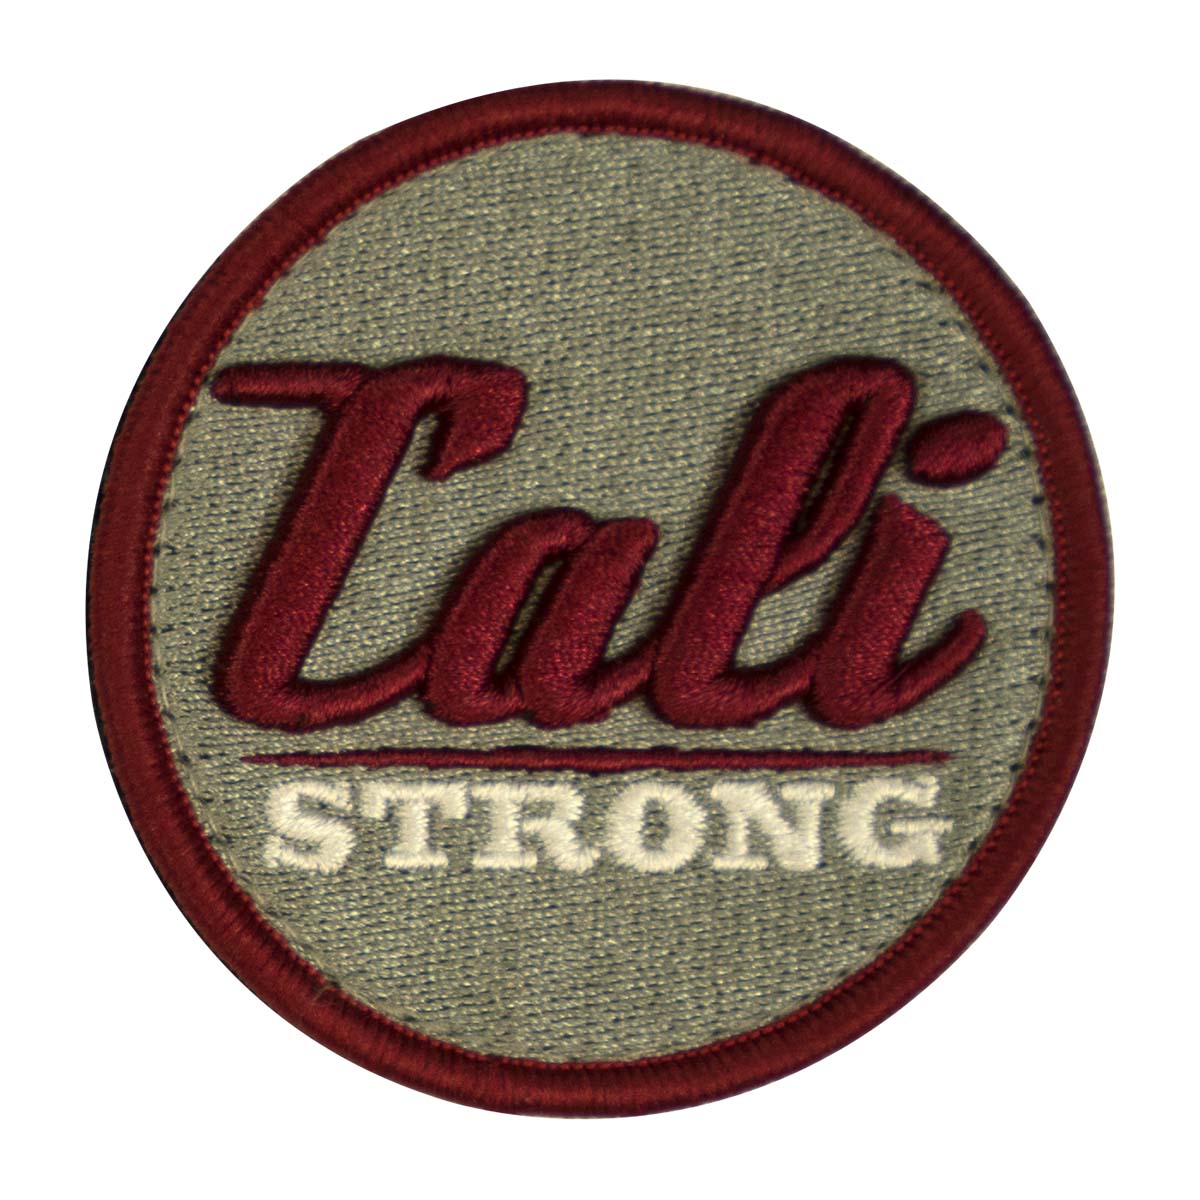 CALI Strong Maroon Grey White Round 3D Hook-and-Loop Morale Patch - Patches - Image 1 - CALI Strong